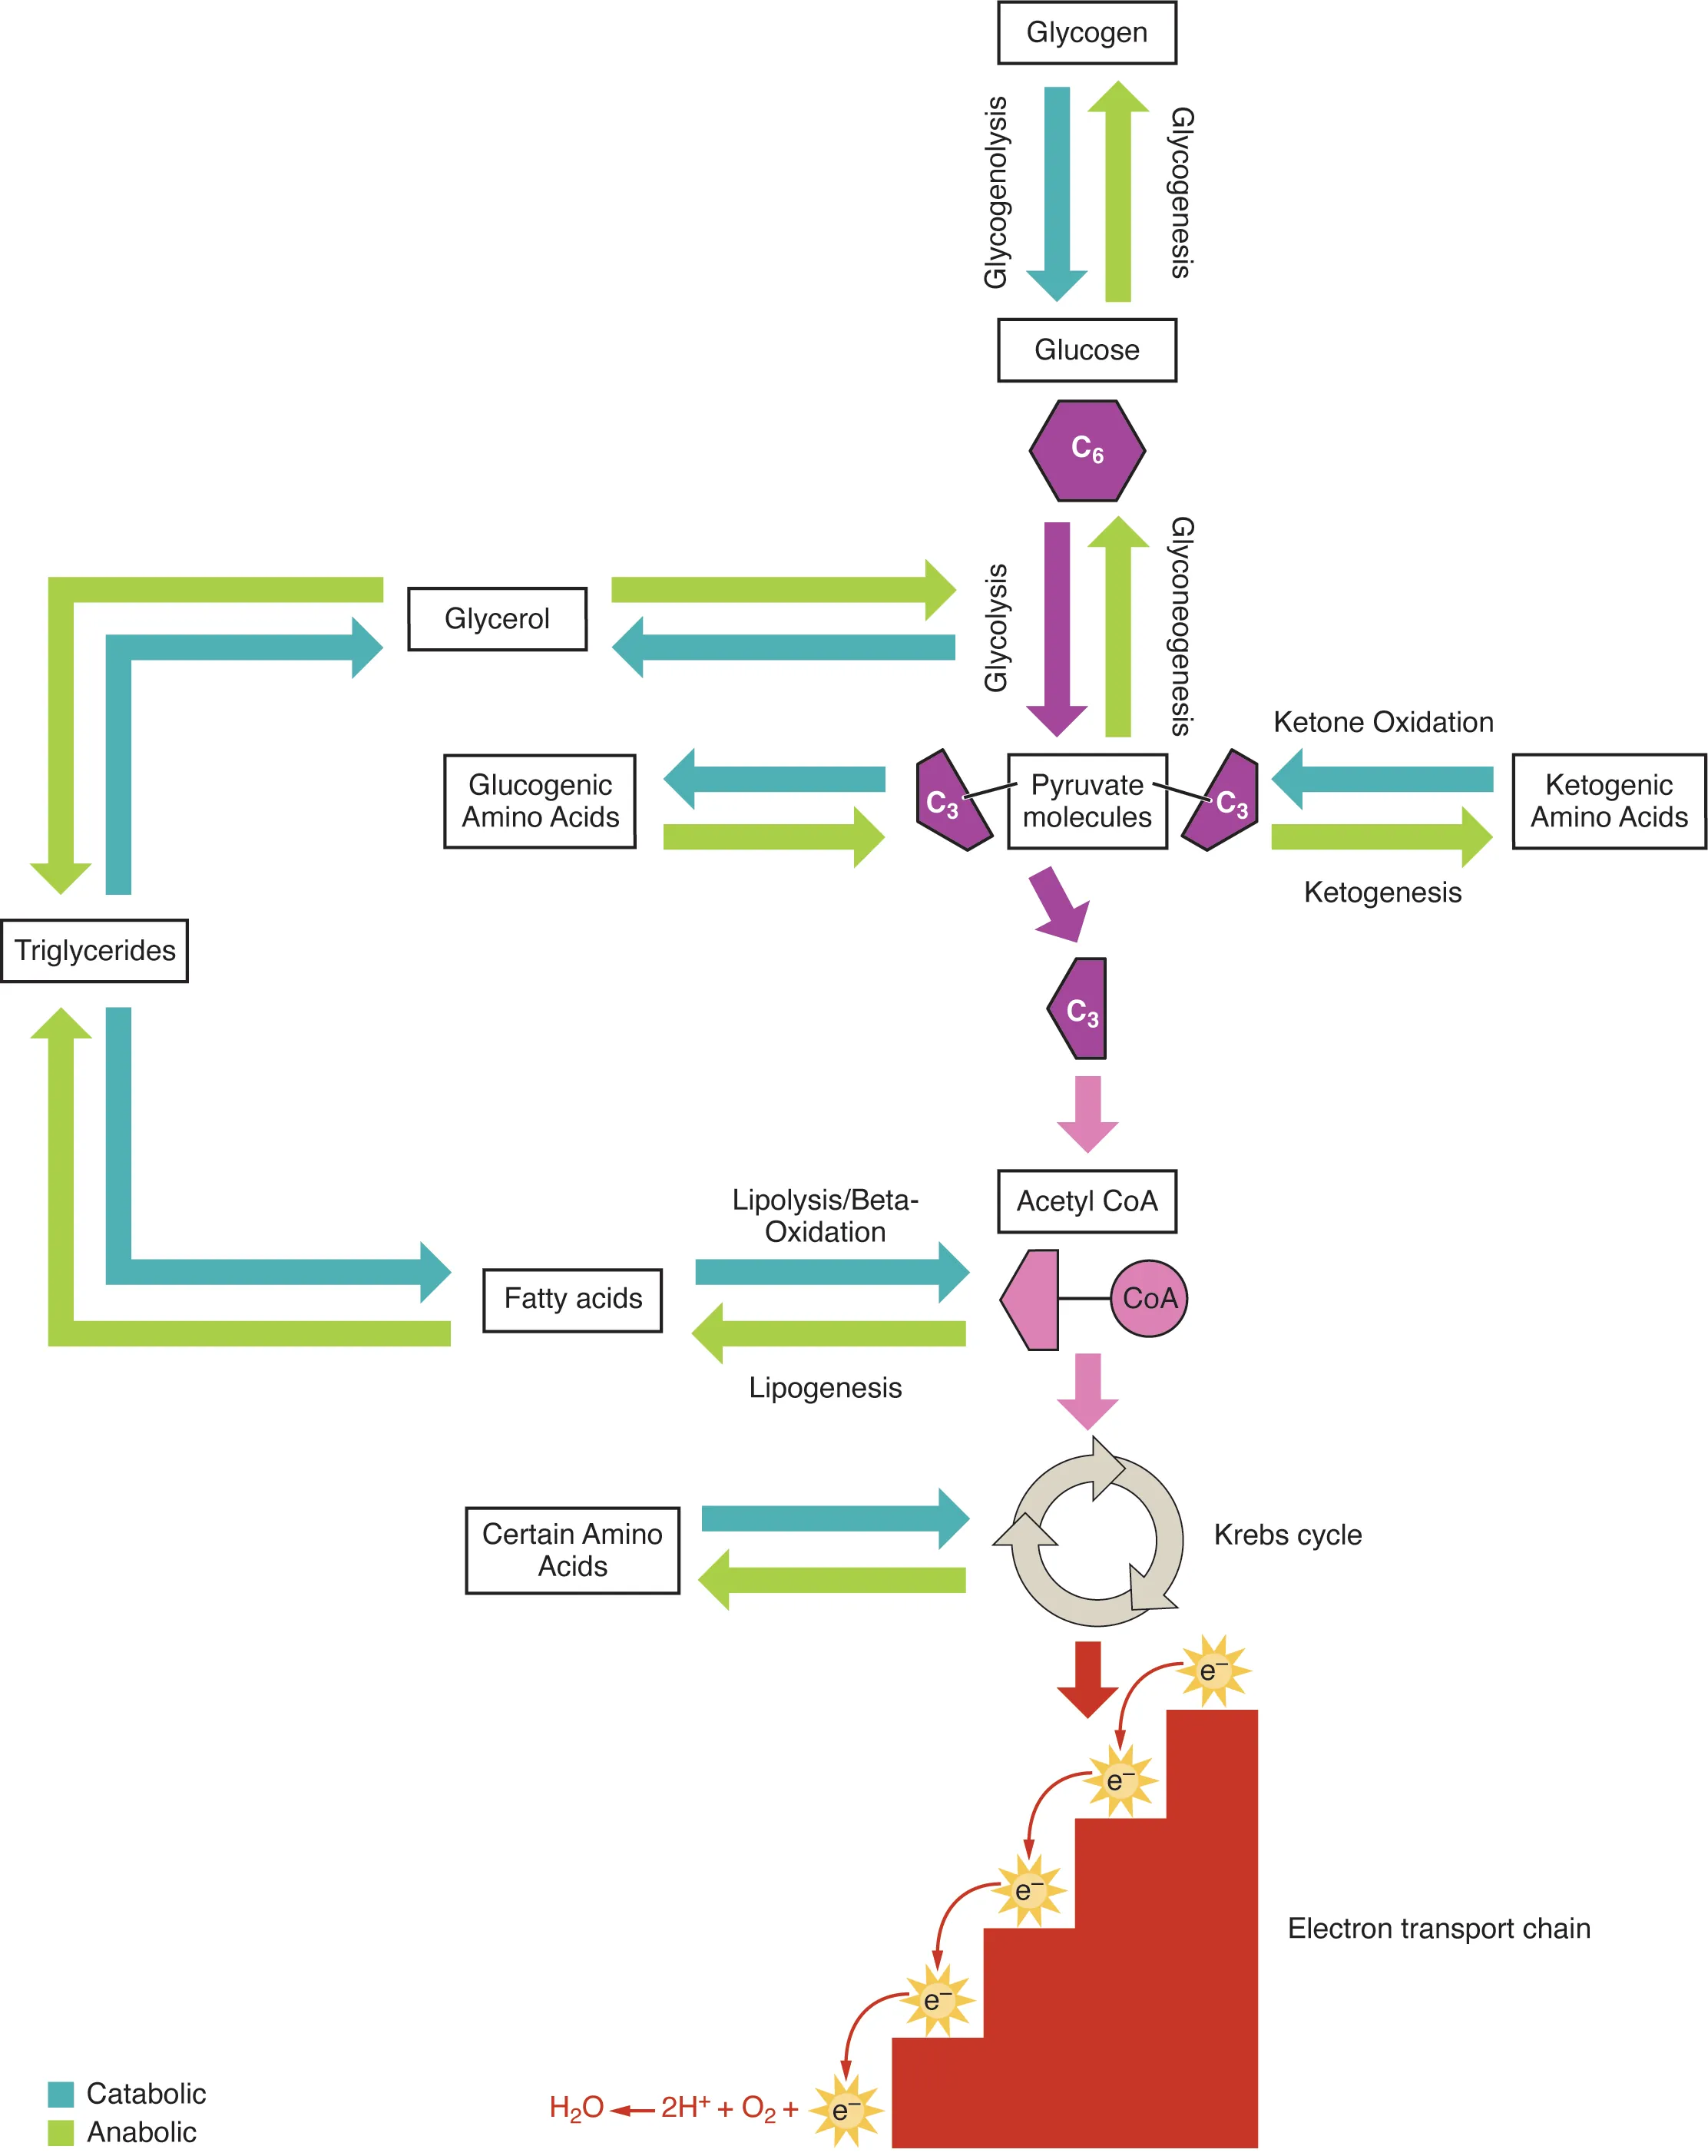 This diagram shows the different metabolic pathways, and how they are connected.